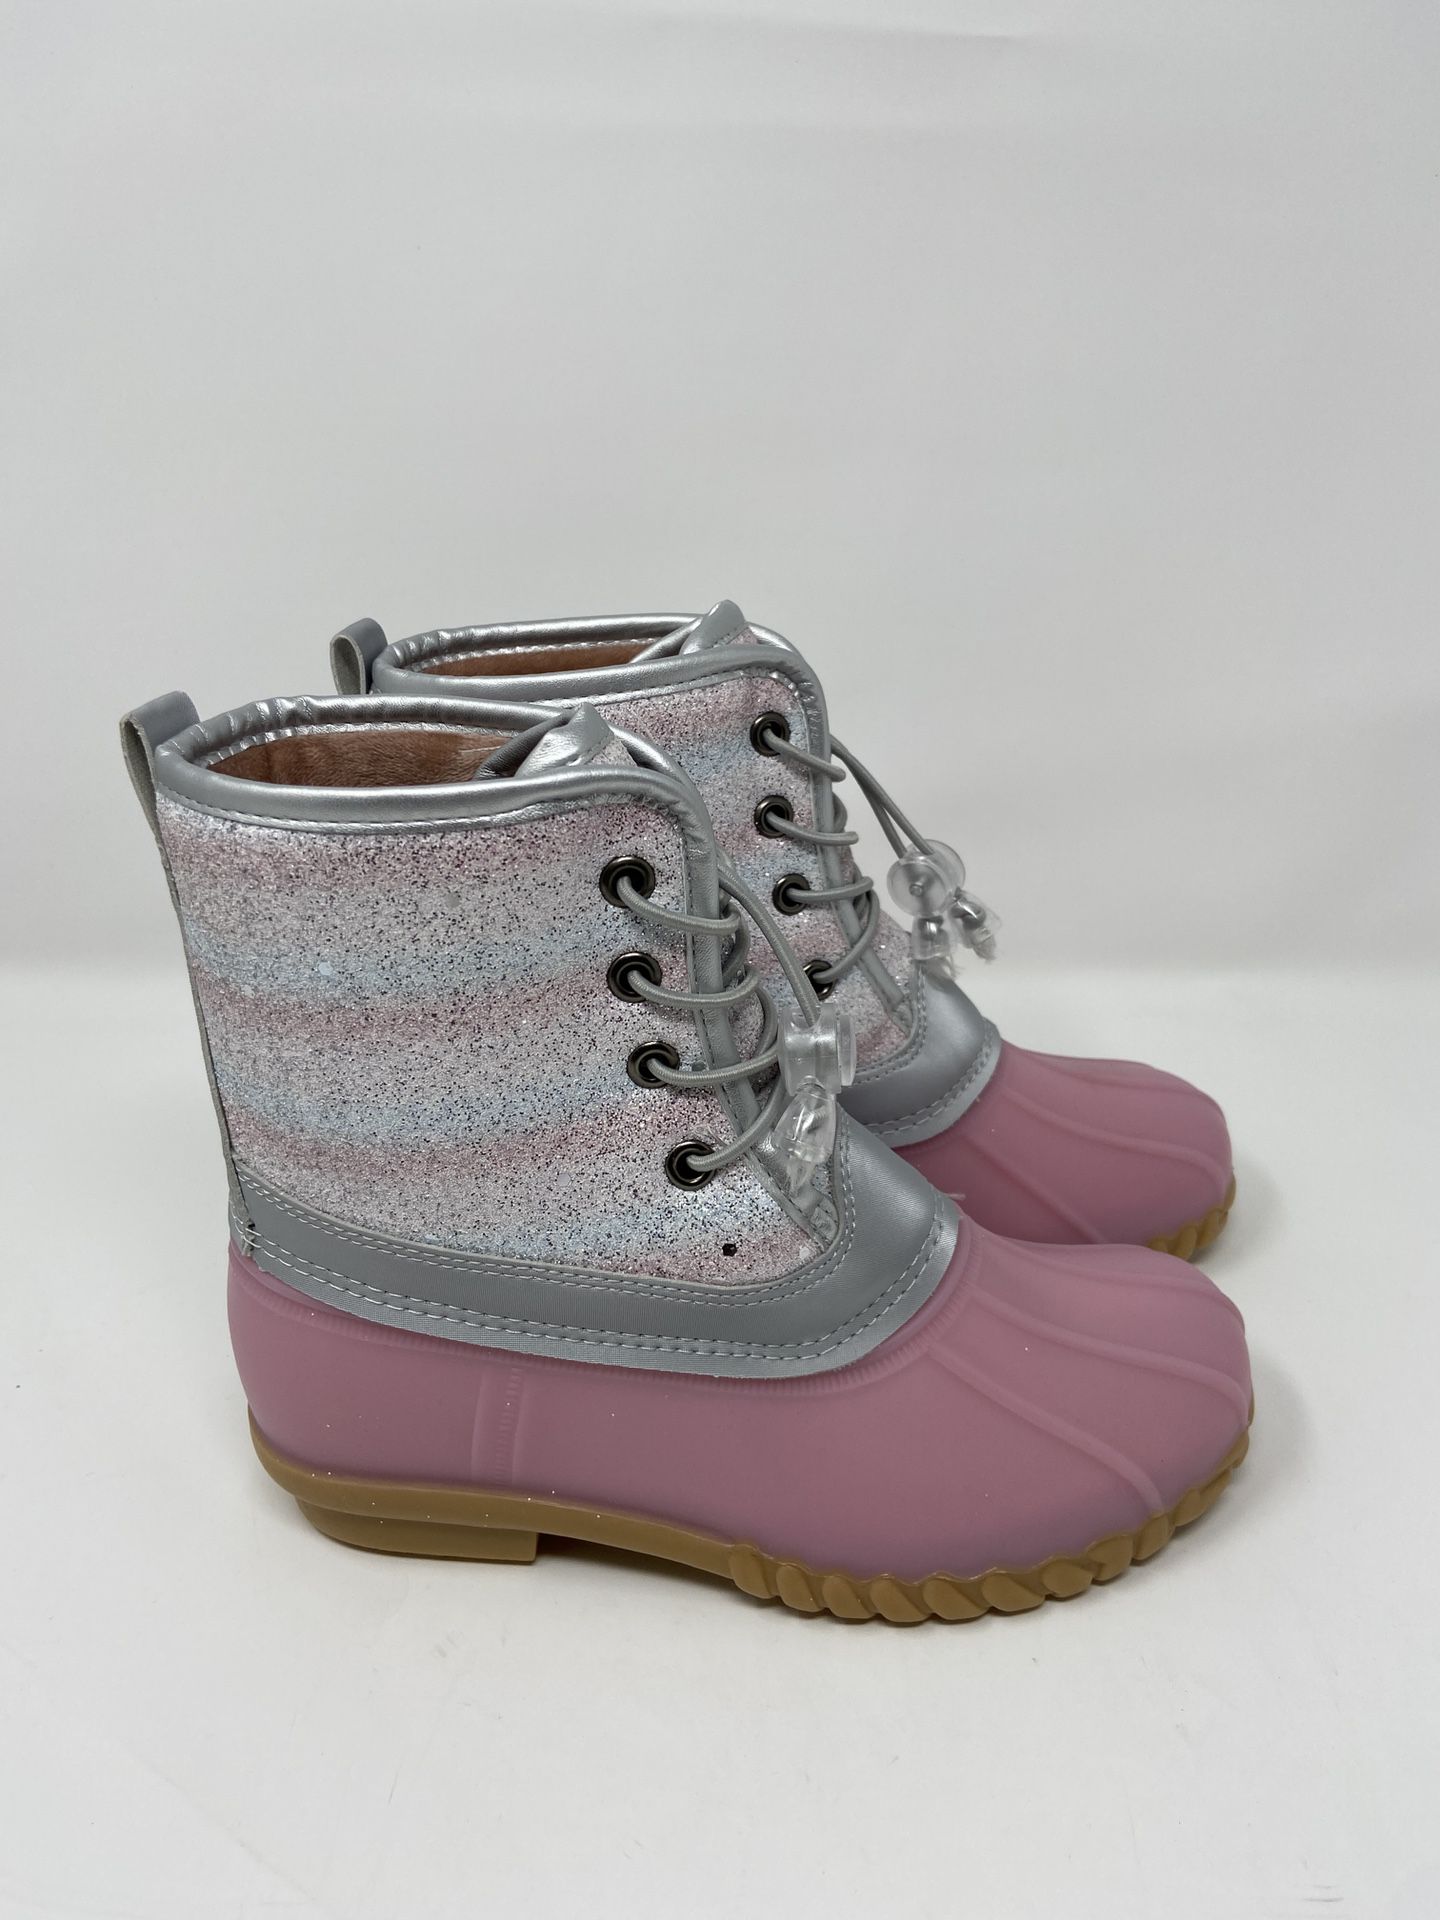 Girls Pink Winter Boots Size 2